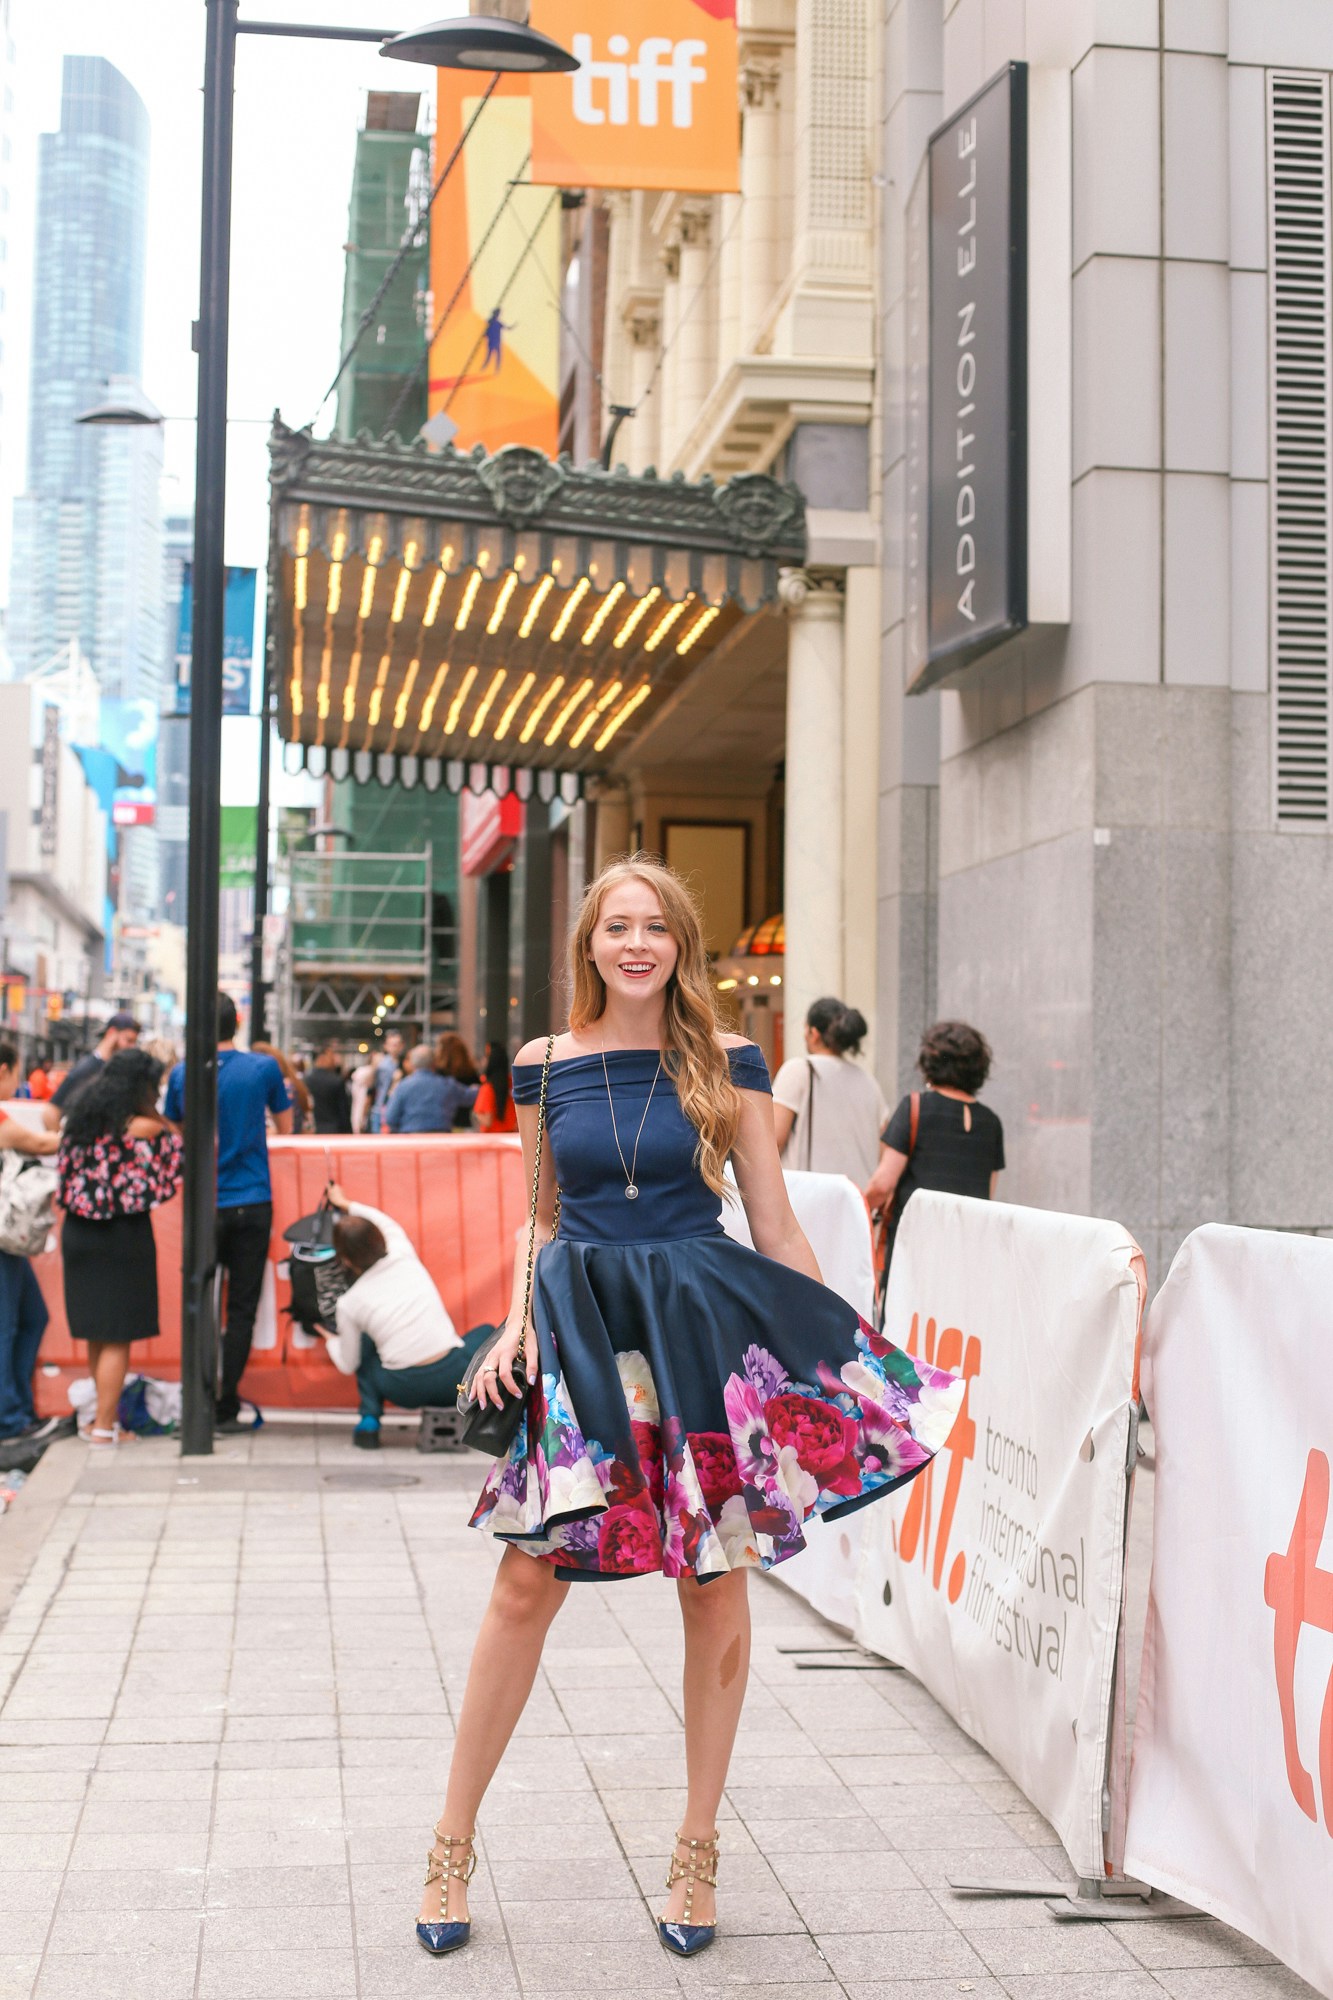 What I wore to a TIFF Premiere: Ted Baker Blushing Bouquet Bardot navy floral dress, BCBG studded shoes, Chanel Diana Bag